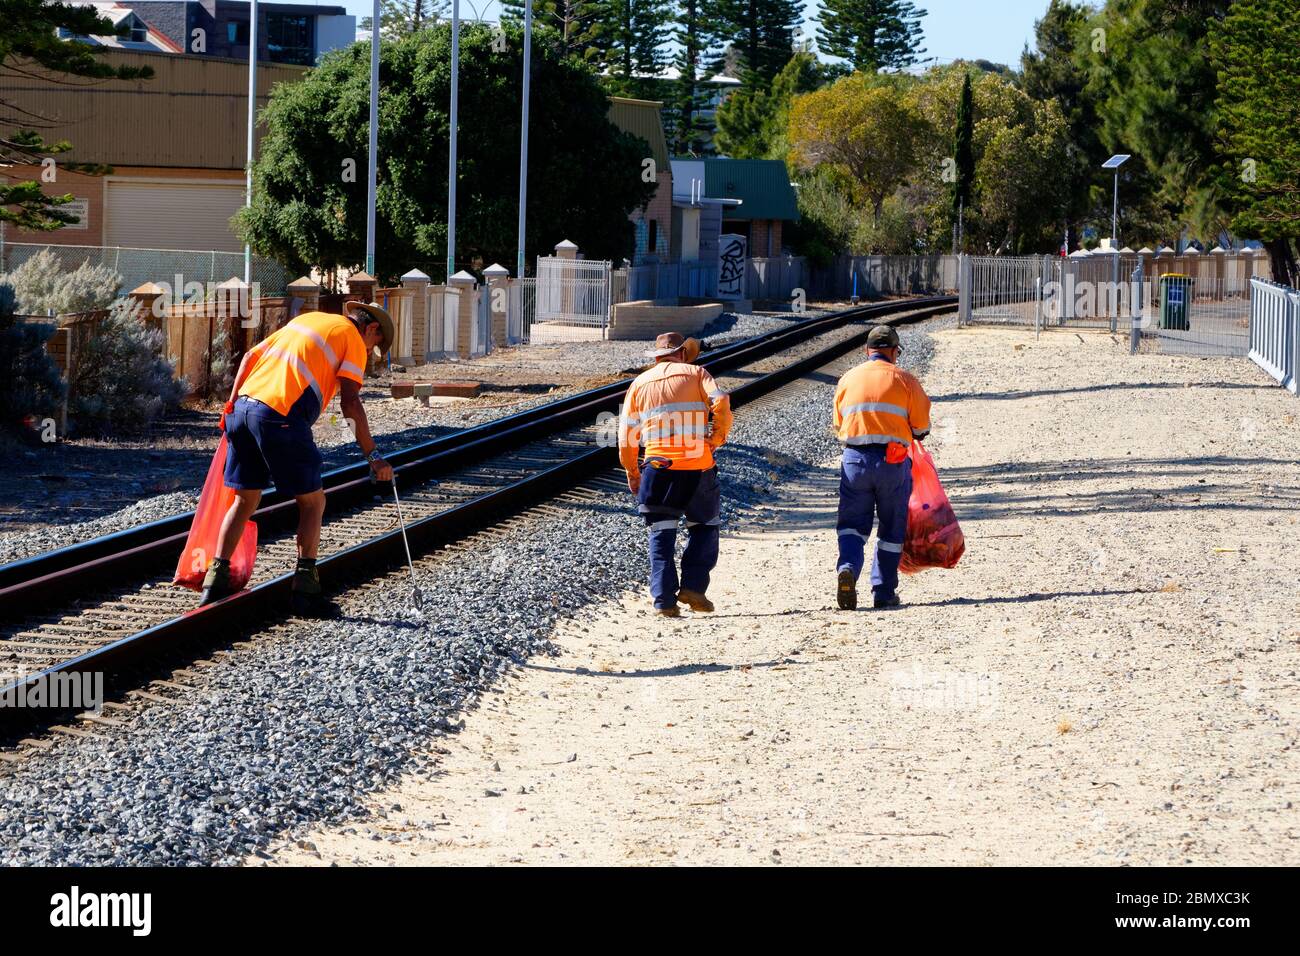 Working party of 3 men removing rubbish from railway line, Fremantle, Western Australia Stock Photo